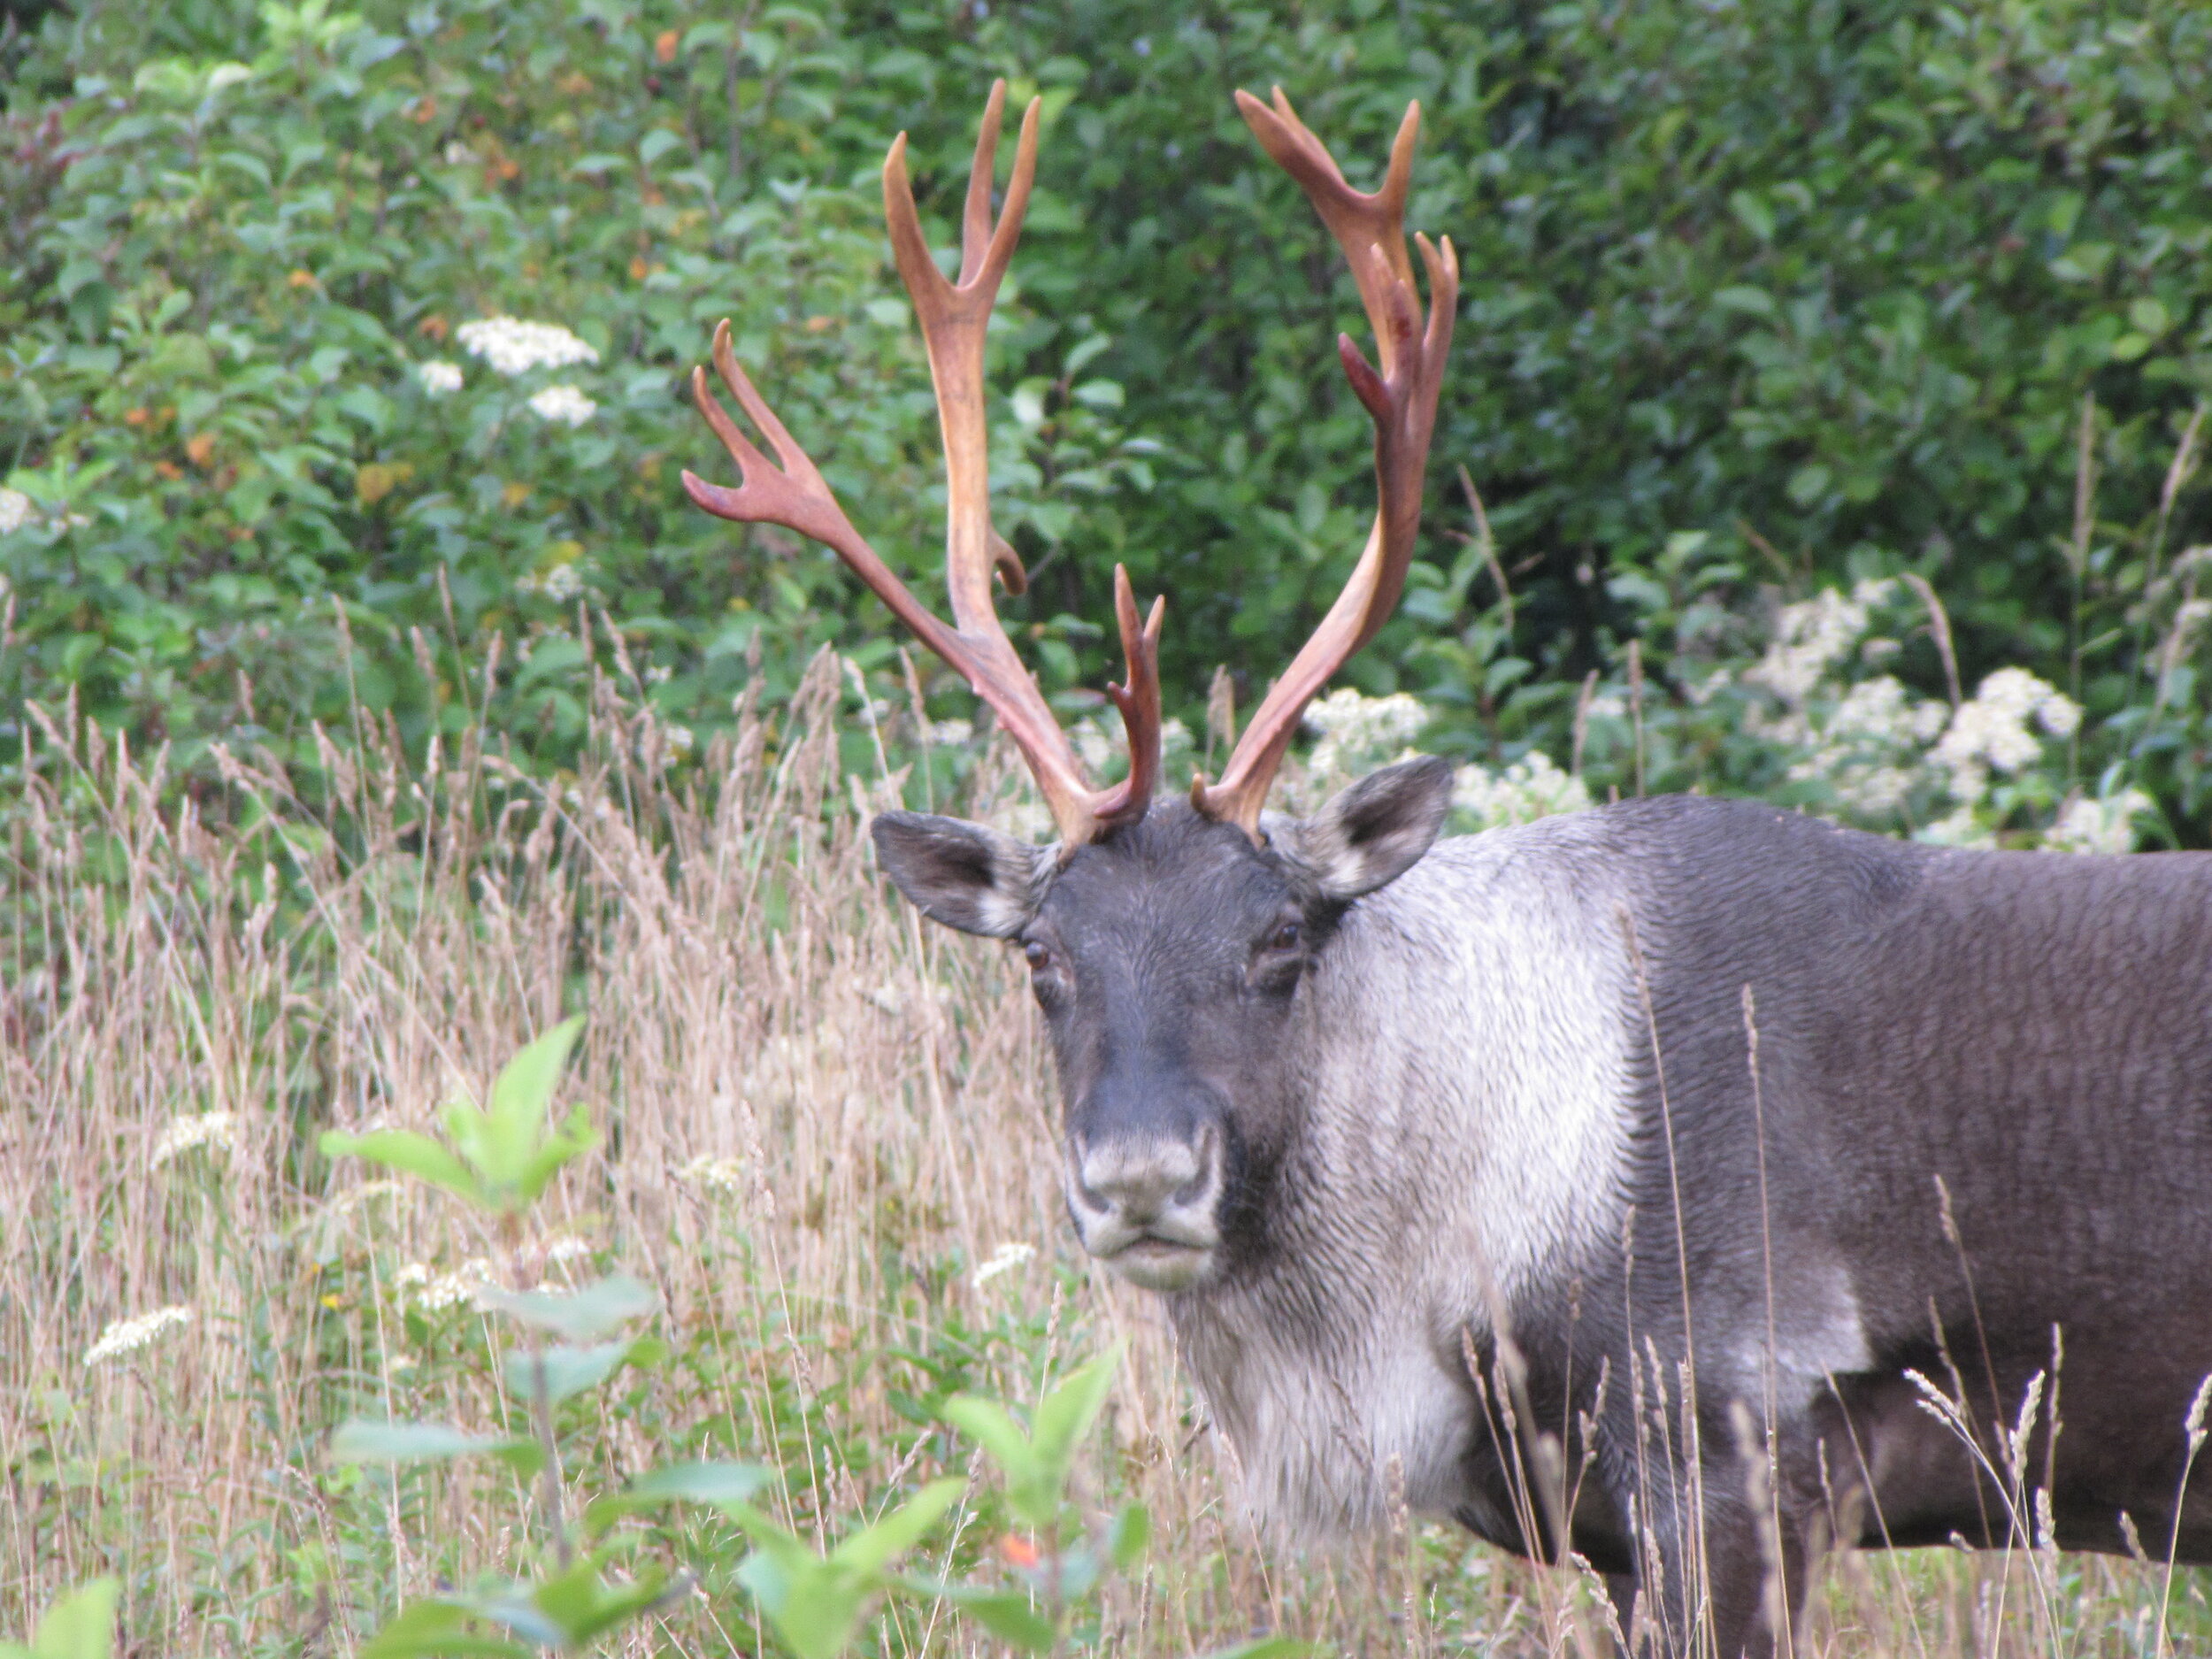 A caribou with large antlers stands in tall grass